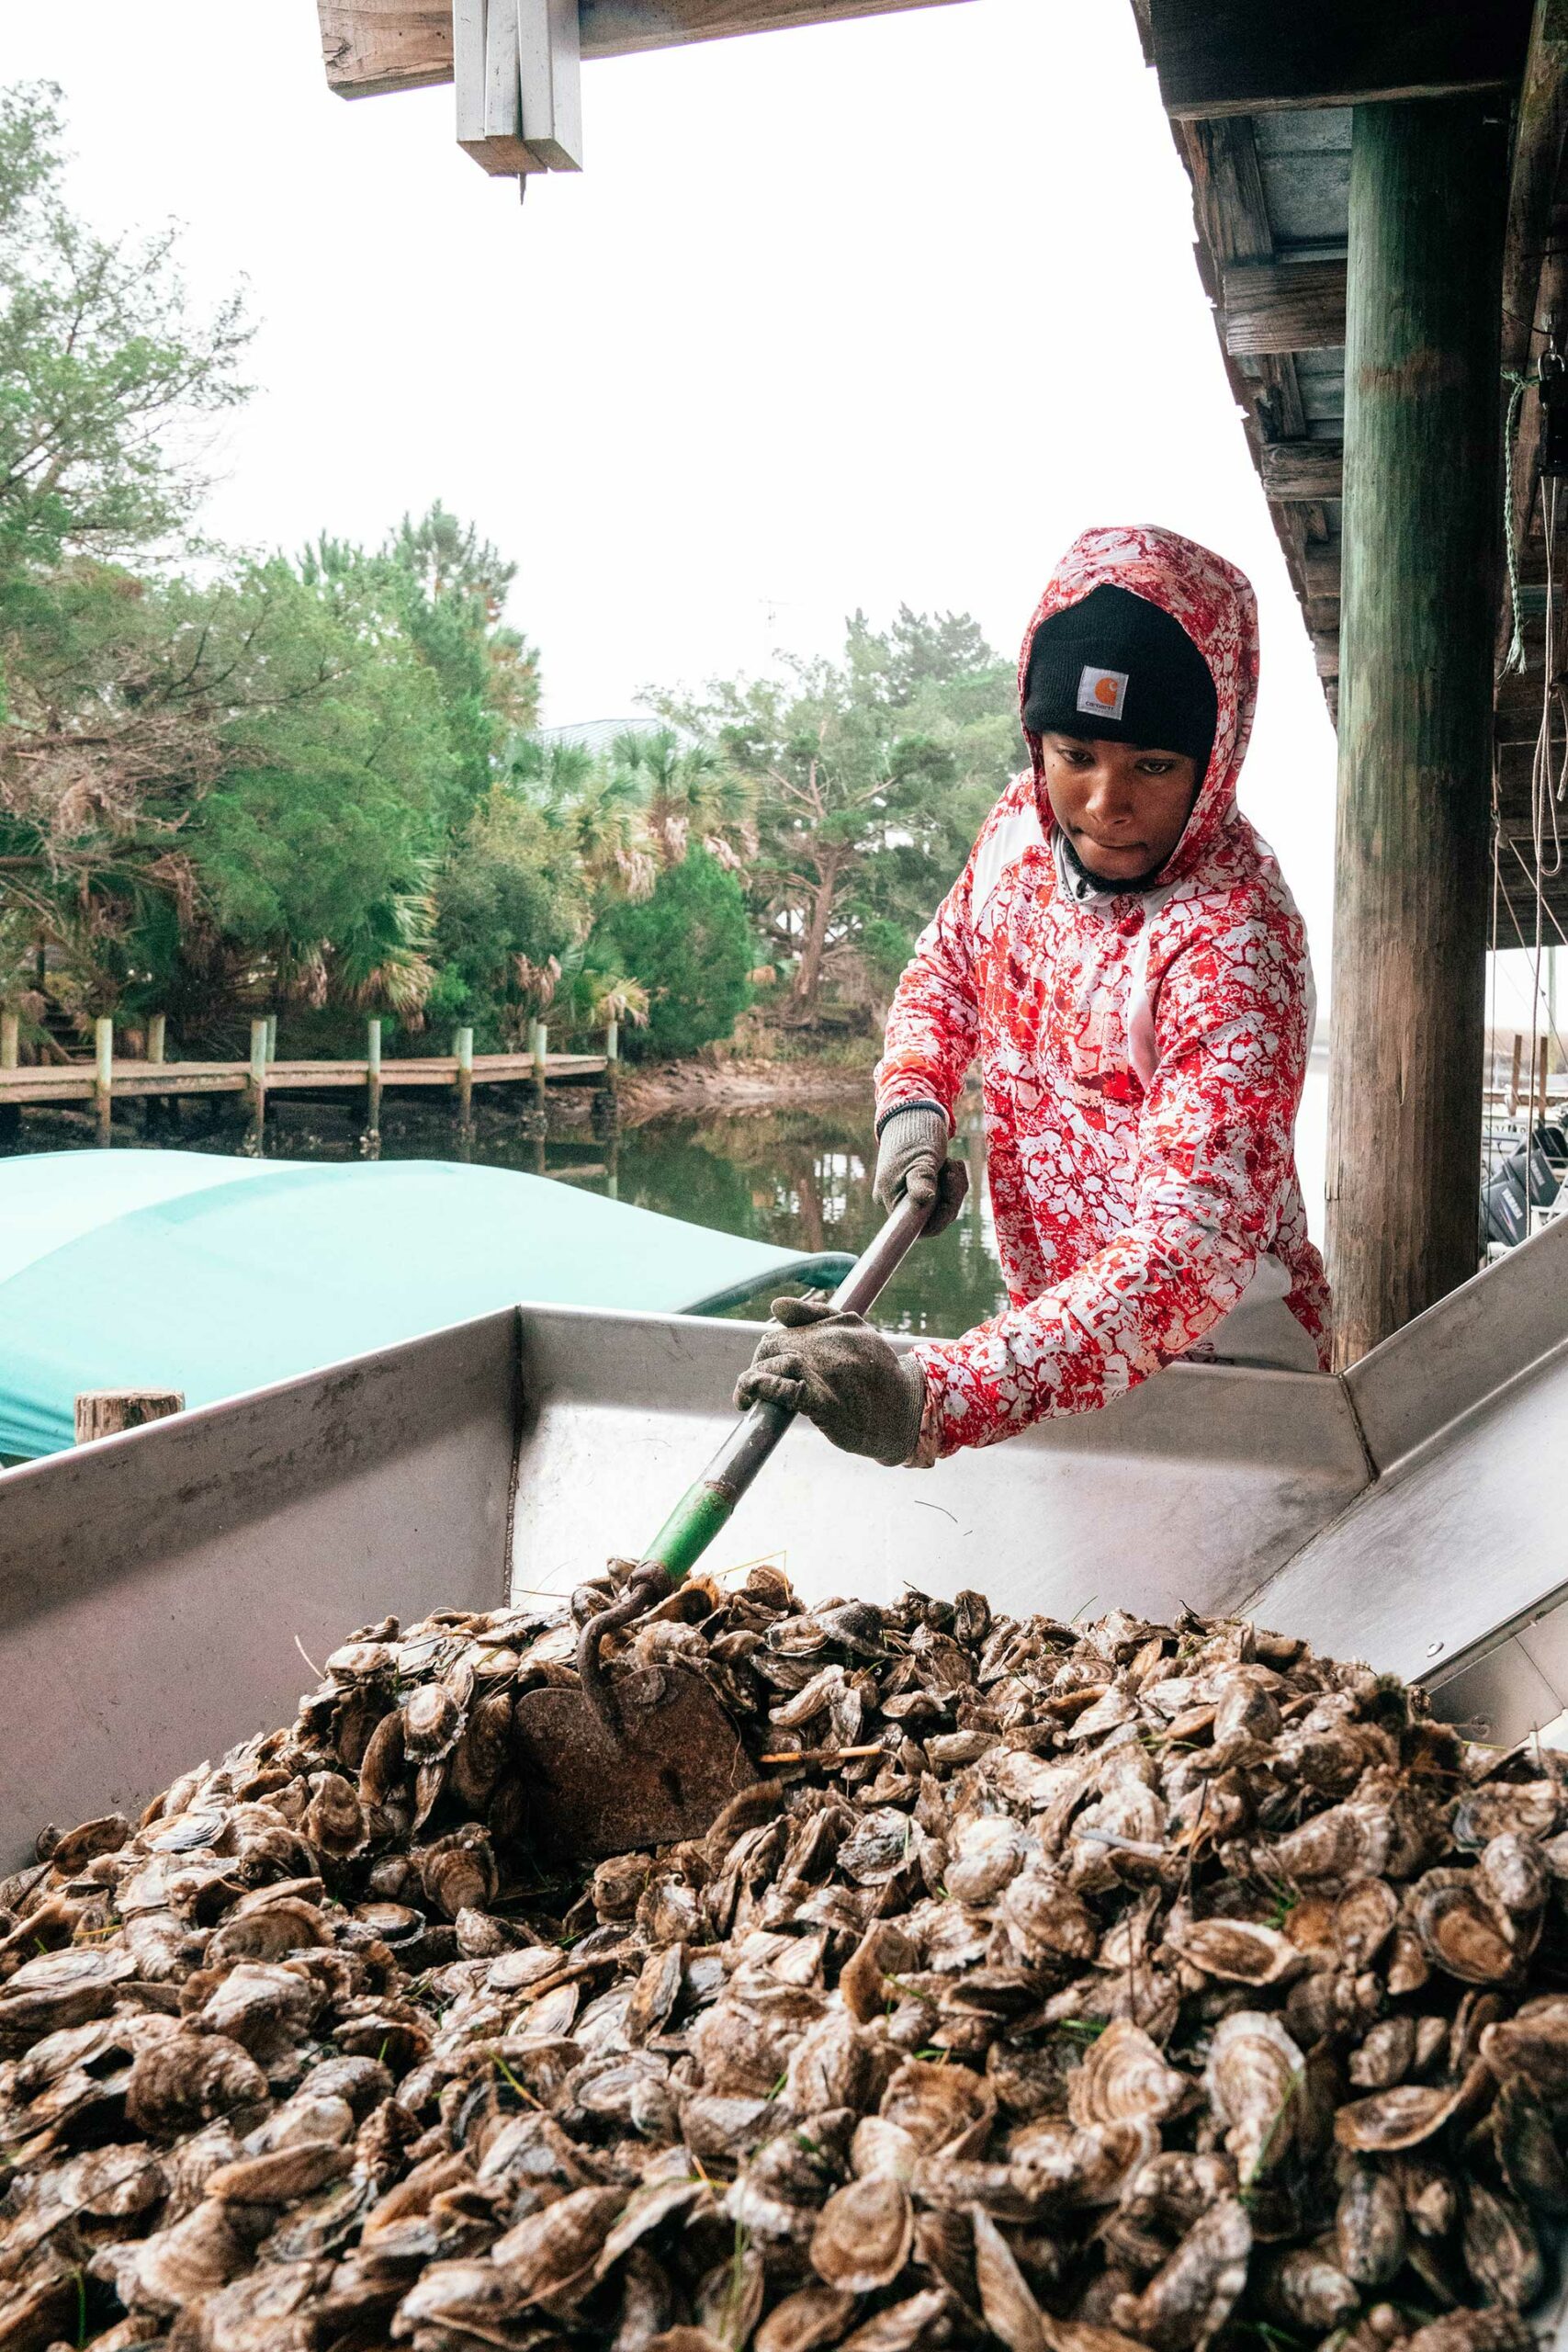 Adrian uses an old garden hoe to spread the oysters around so that they feed more easily into the tumbler, which cleans and sorts them.